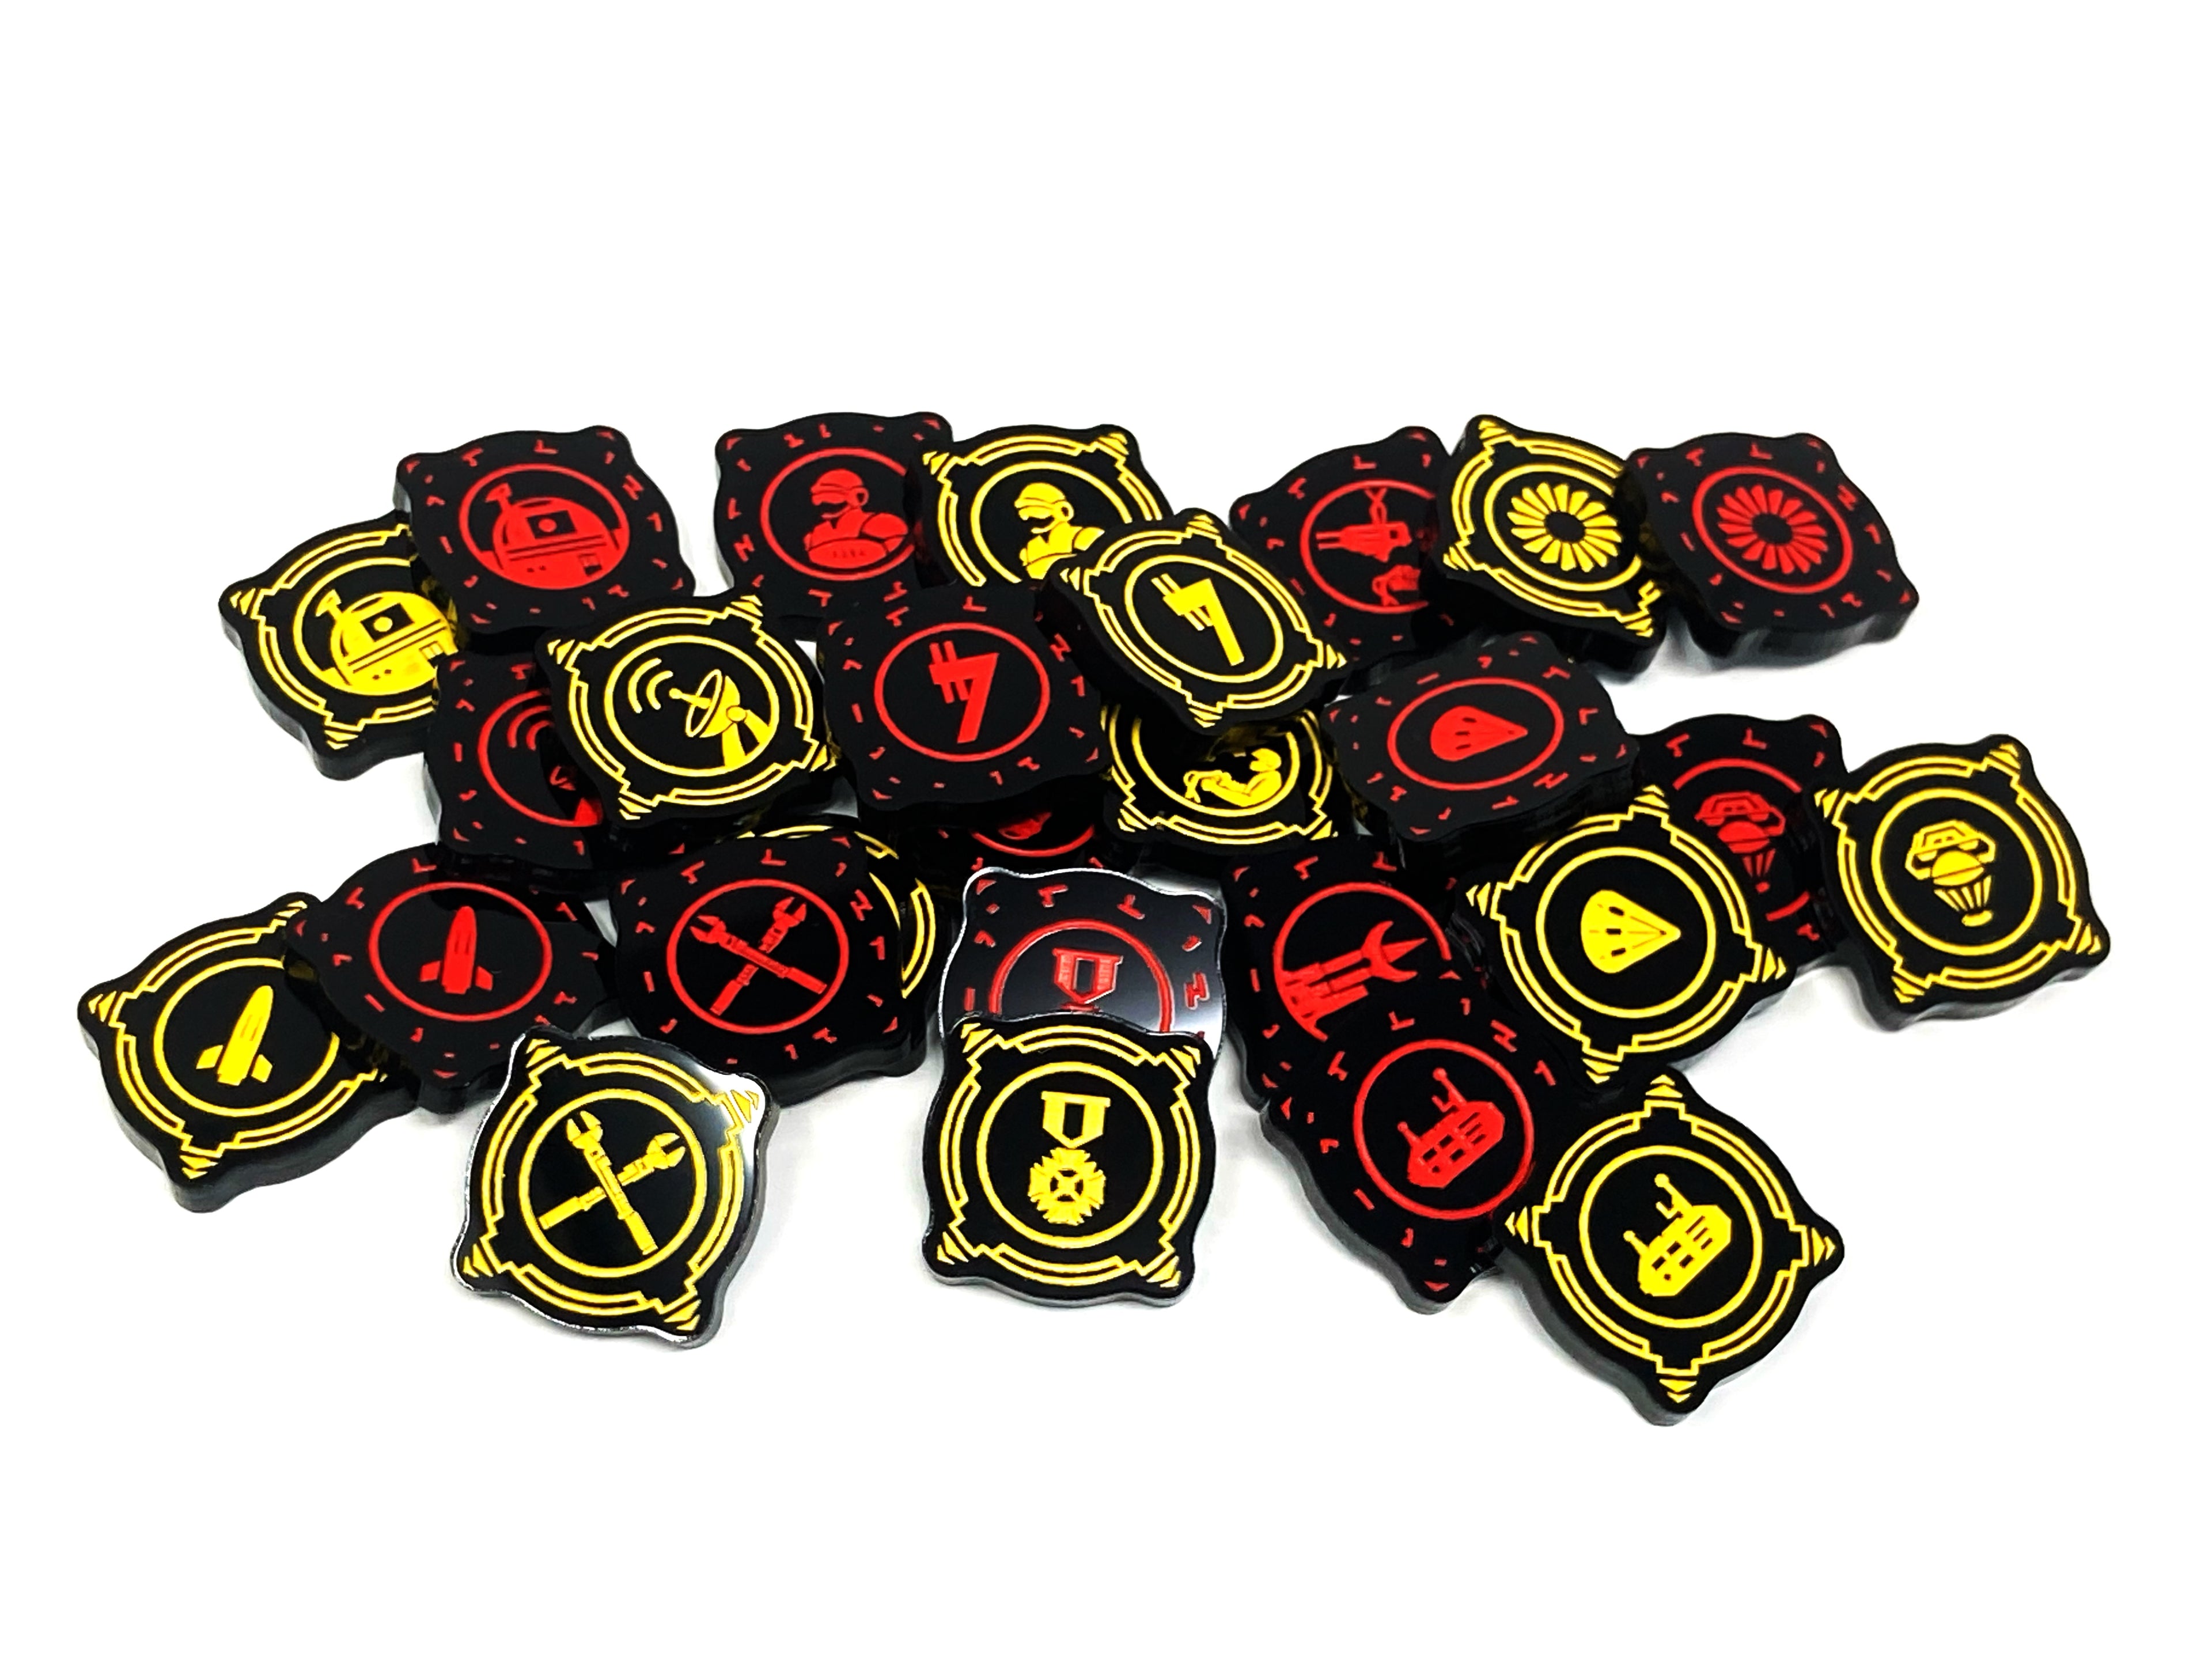 2 x Torpedo Charge Tokens - Black Series (Double Sided)